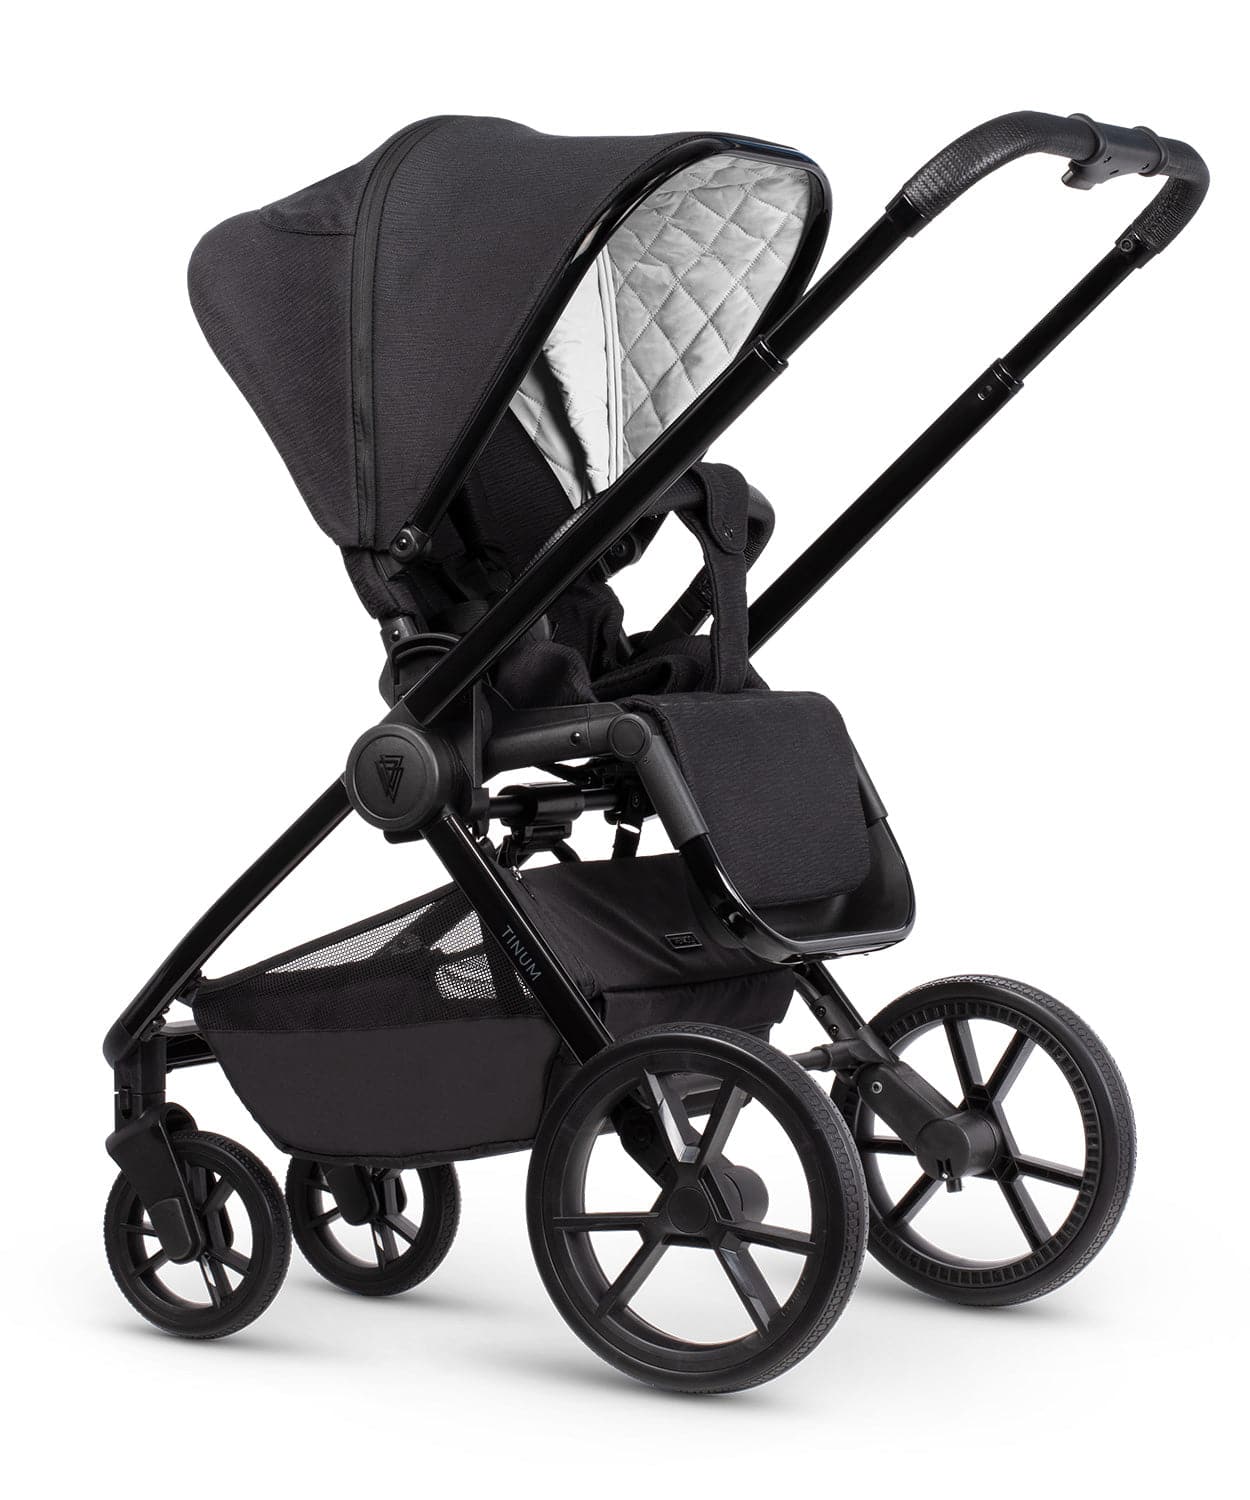 Venicci Tinum Edge SE 3 In 1 Travel System - Raven - For Your Little One